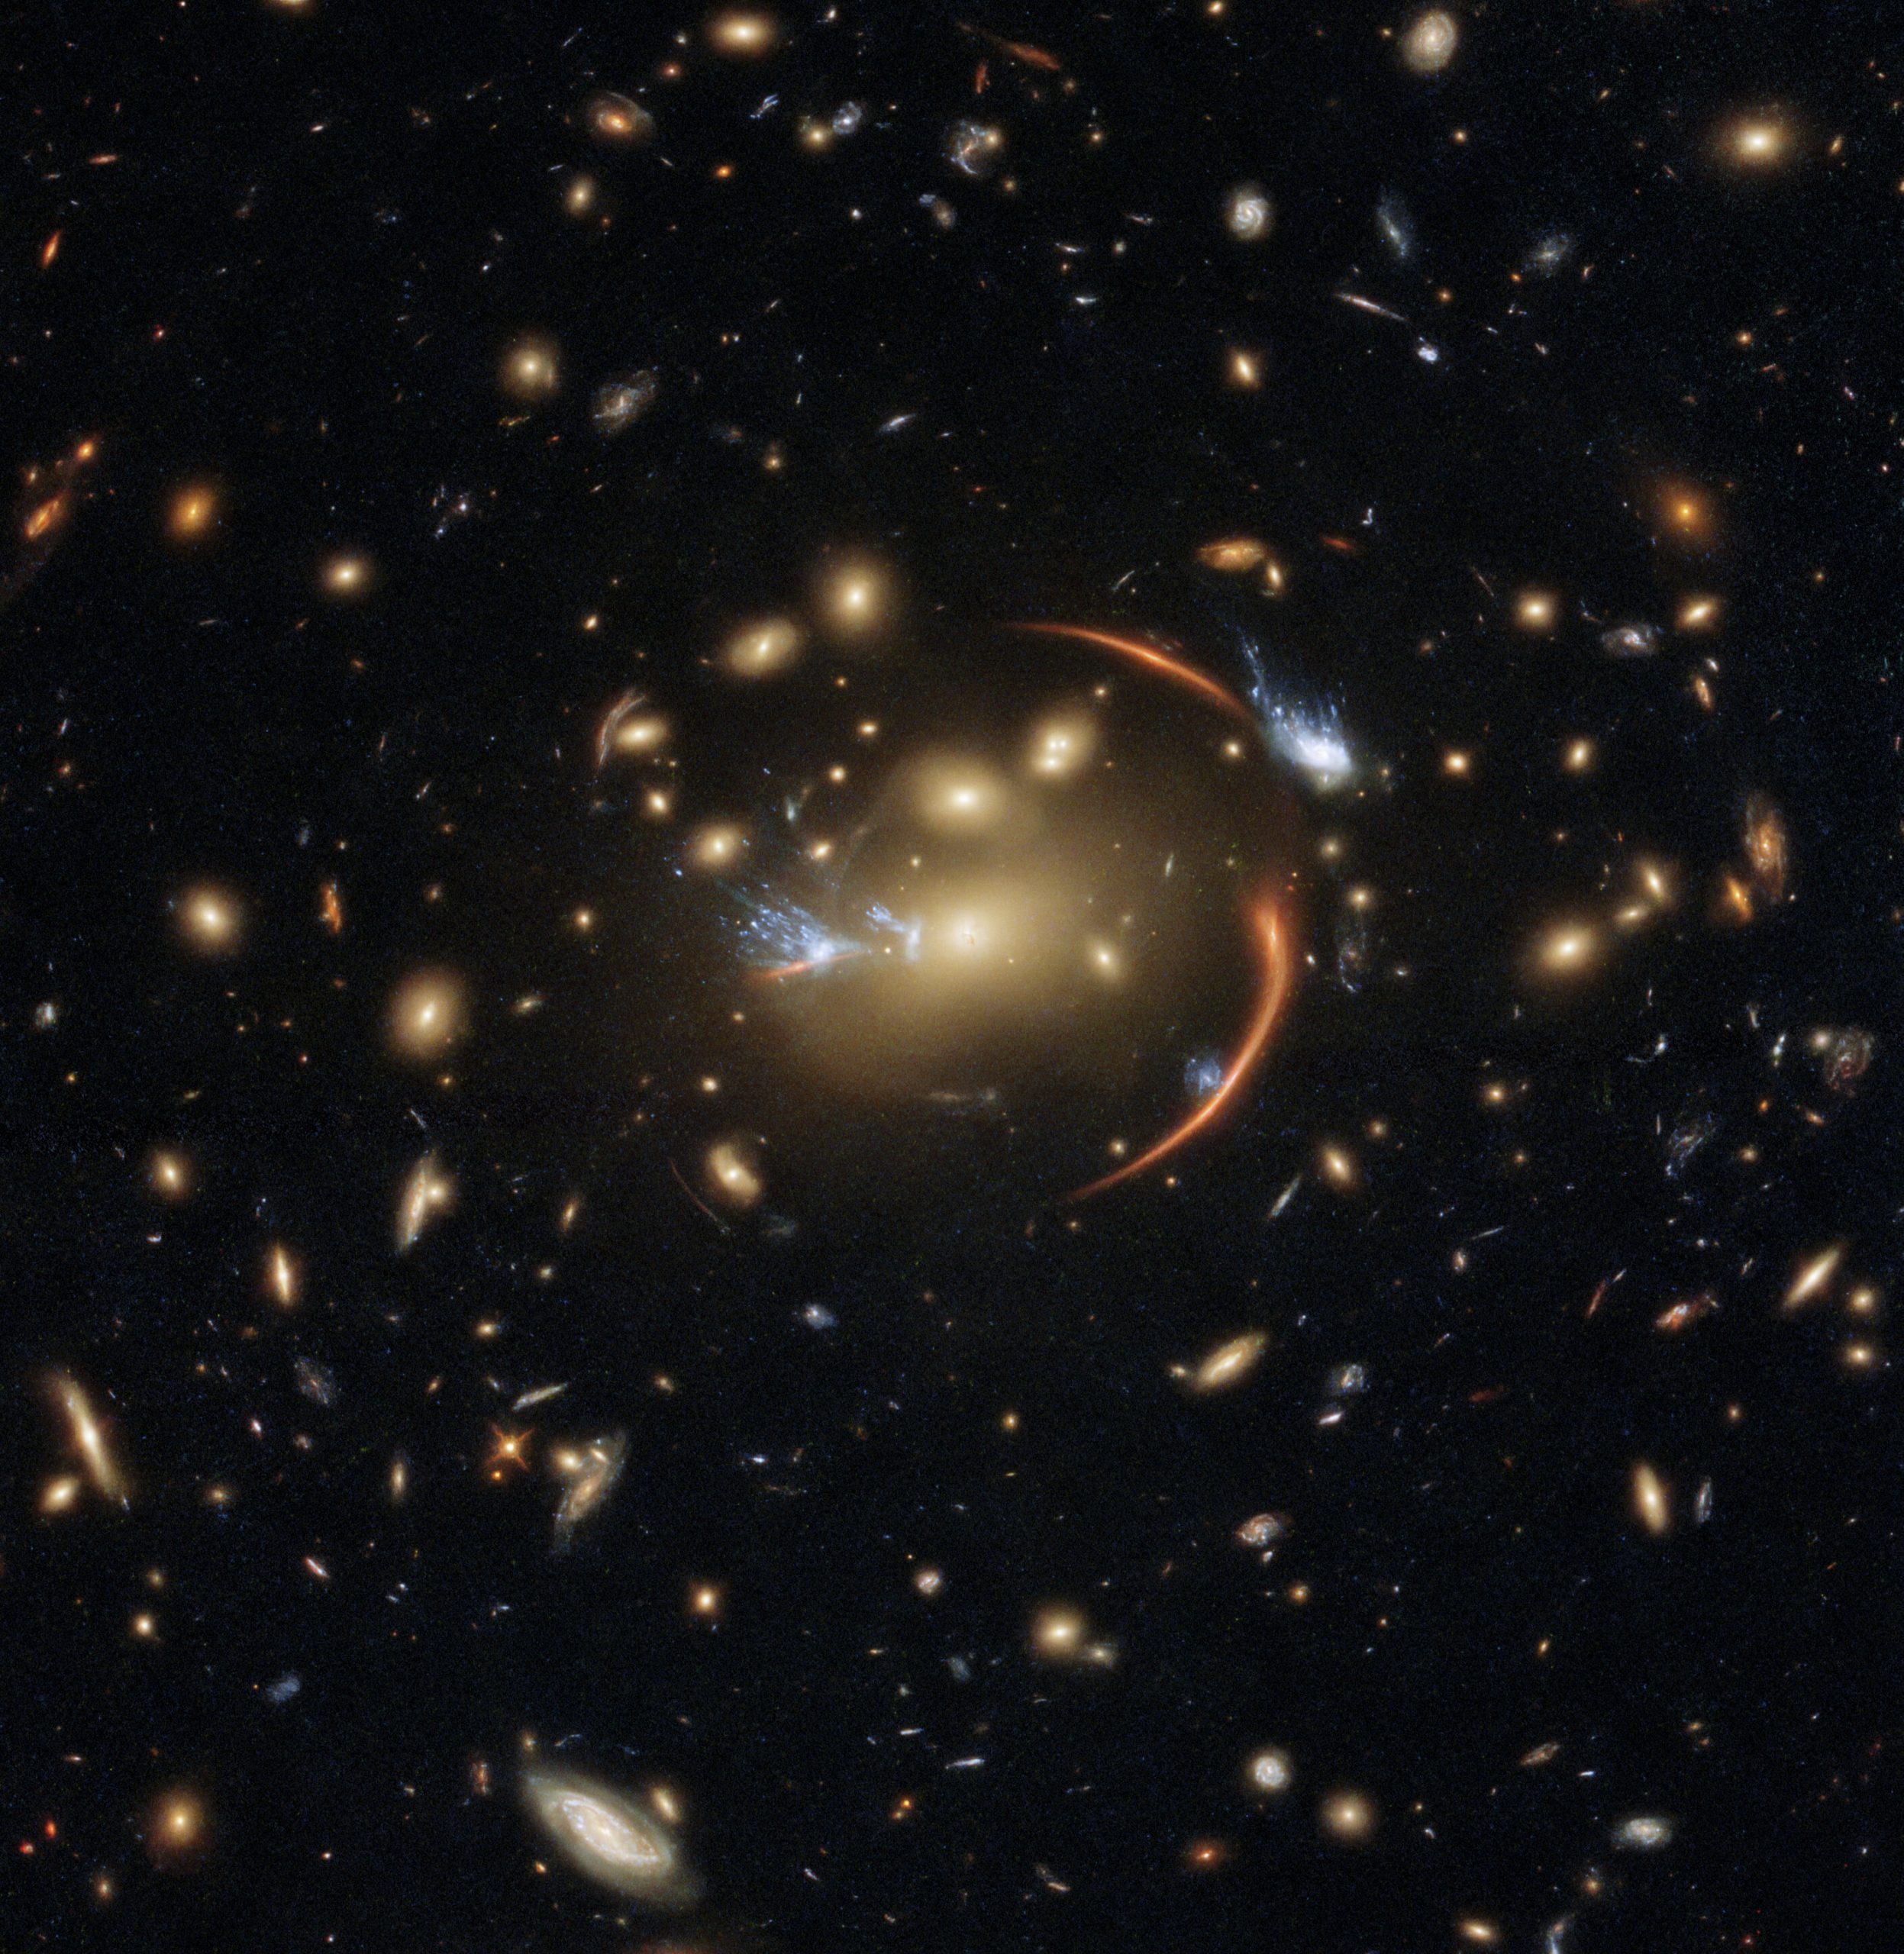 August's image includes the nearby galaxy cluster dubbed MACSJ0138.0-2155, which is an incredible example of gravitational lensing as we see glimpses of a far more distant galaxy where stars no longer form. Credit: ESA/Hubble & NASA, A. Newman, M. Akhshik, K. Whitaker